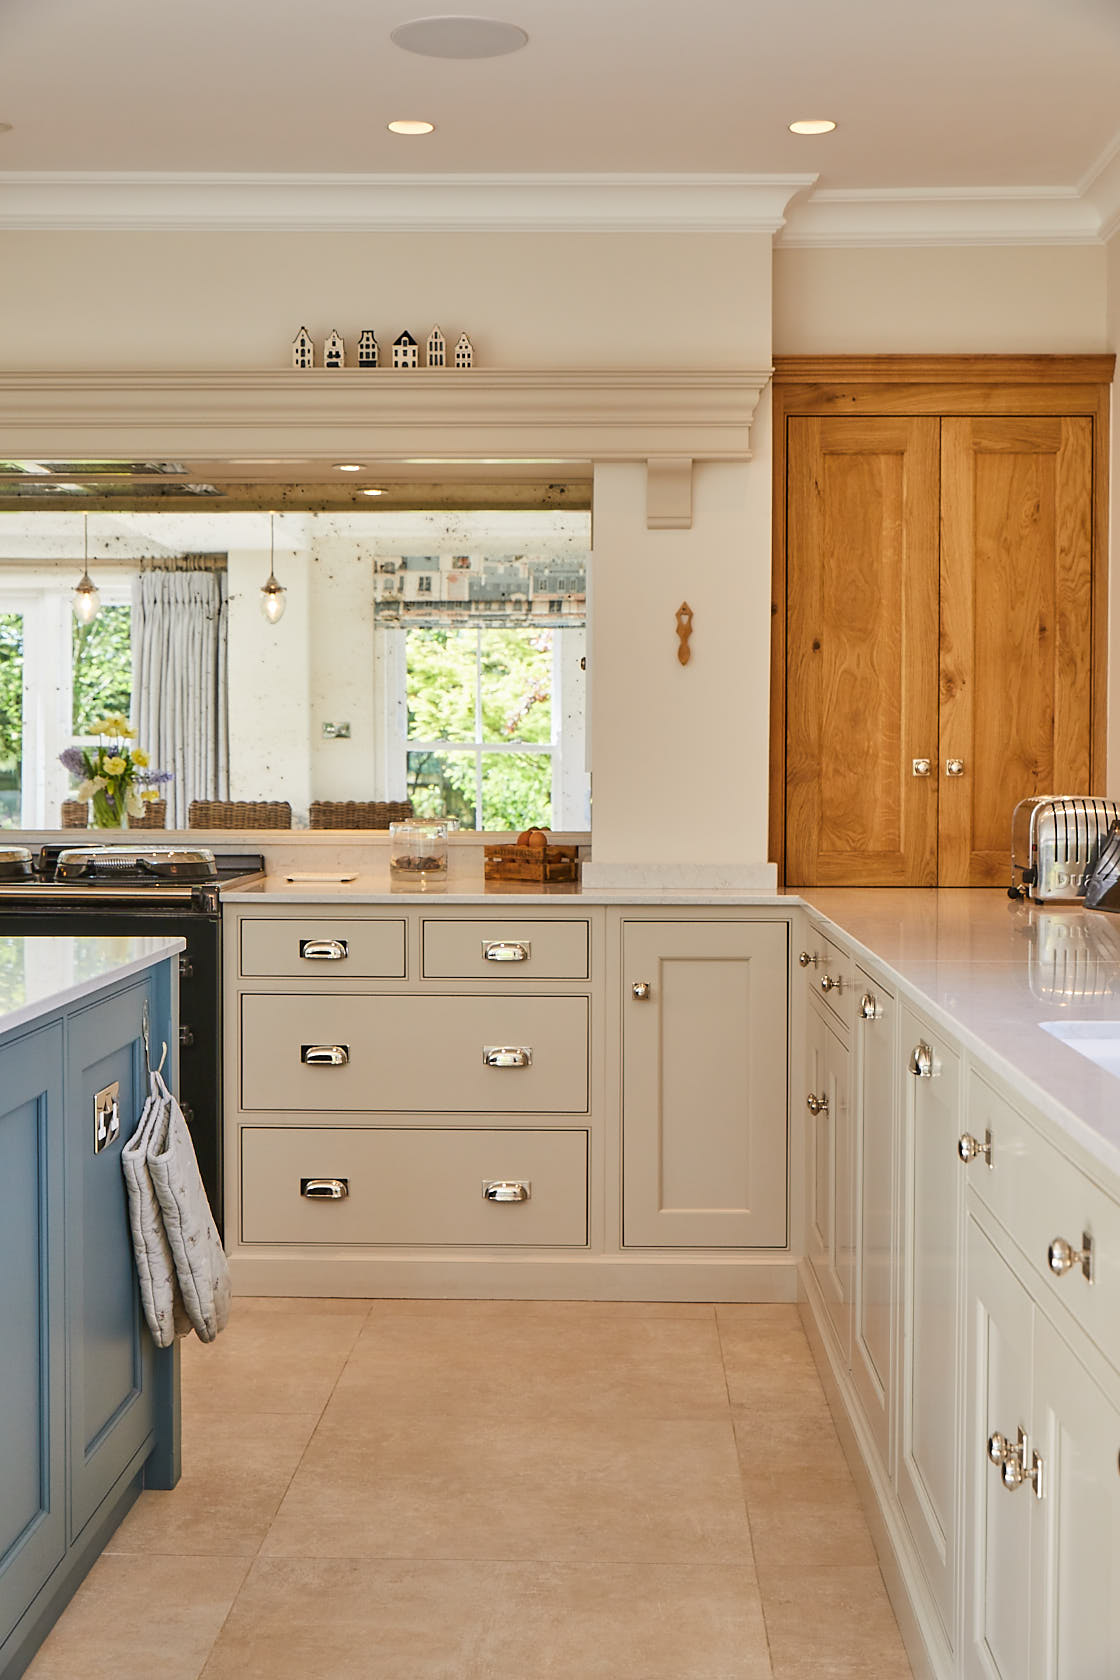 Painted cream kitchen cabinets contrast with solid oak traditional wall unit nestled in alcove